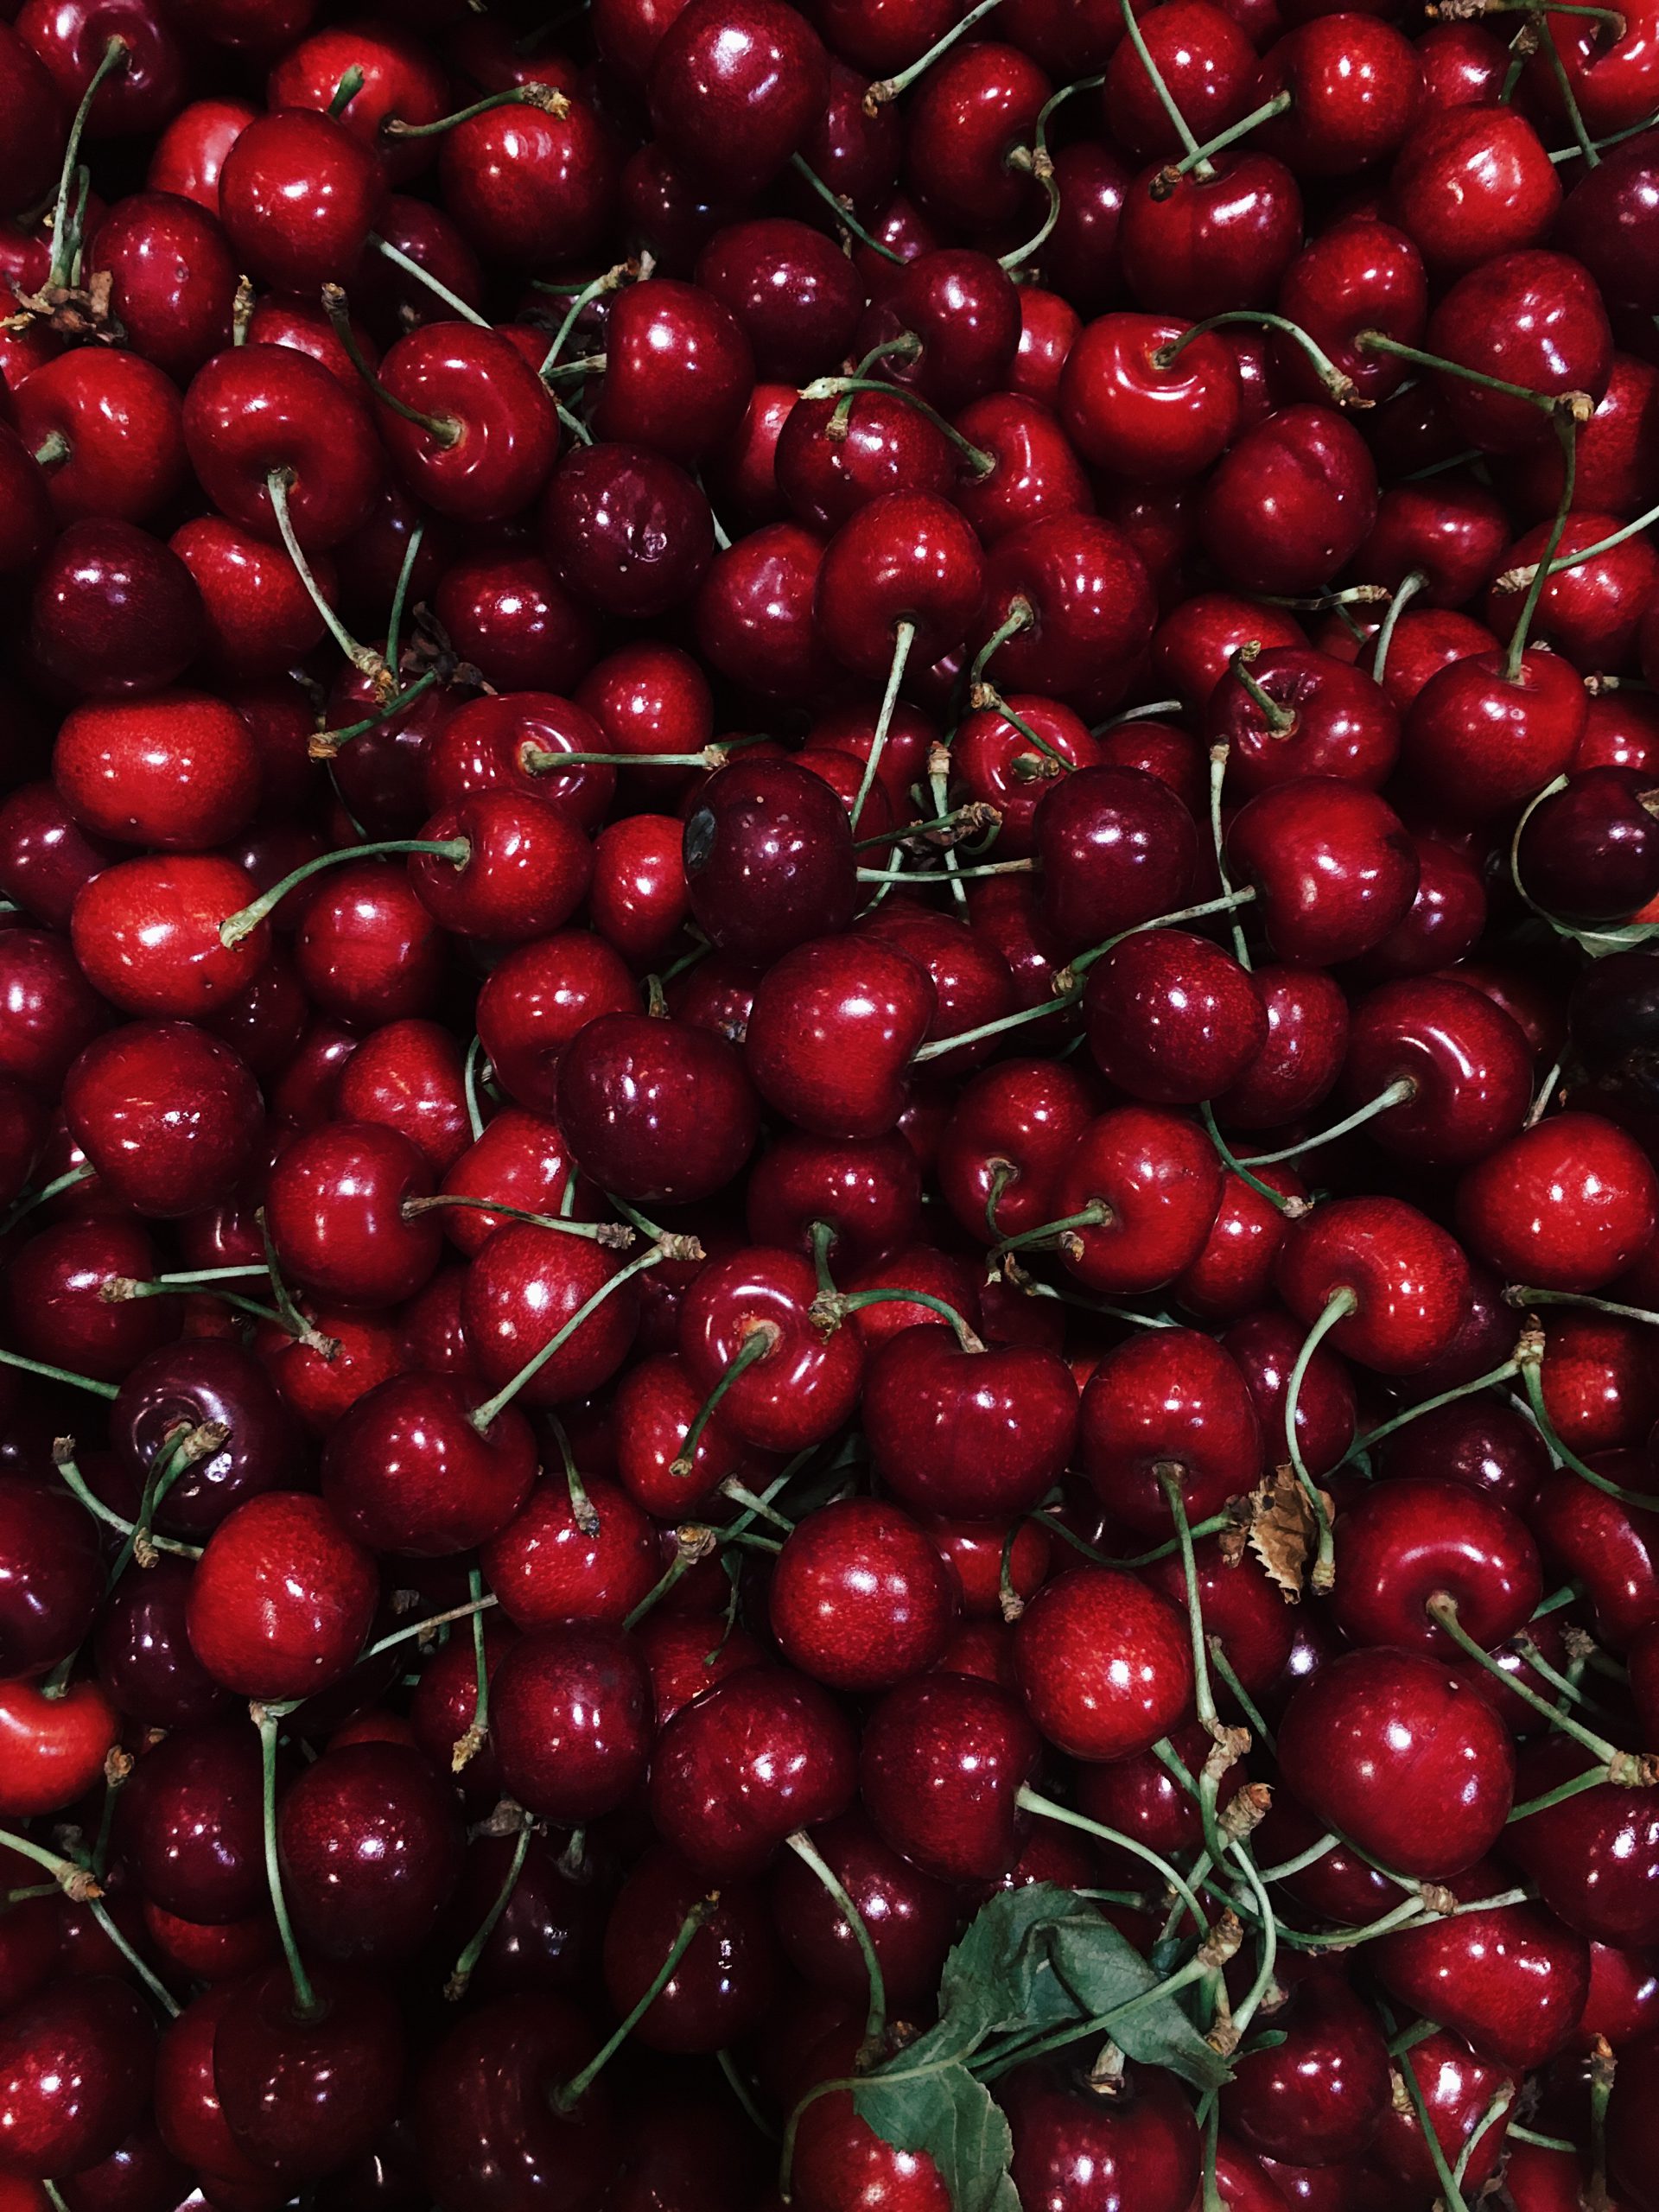 Pile of Picked Cherries with stems